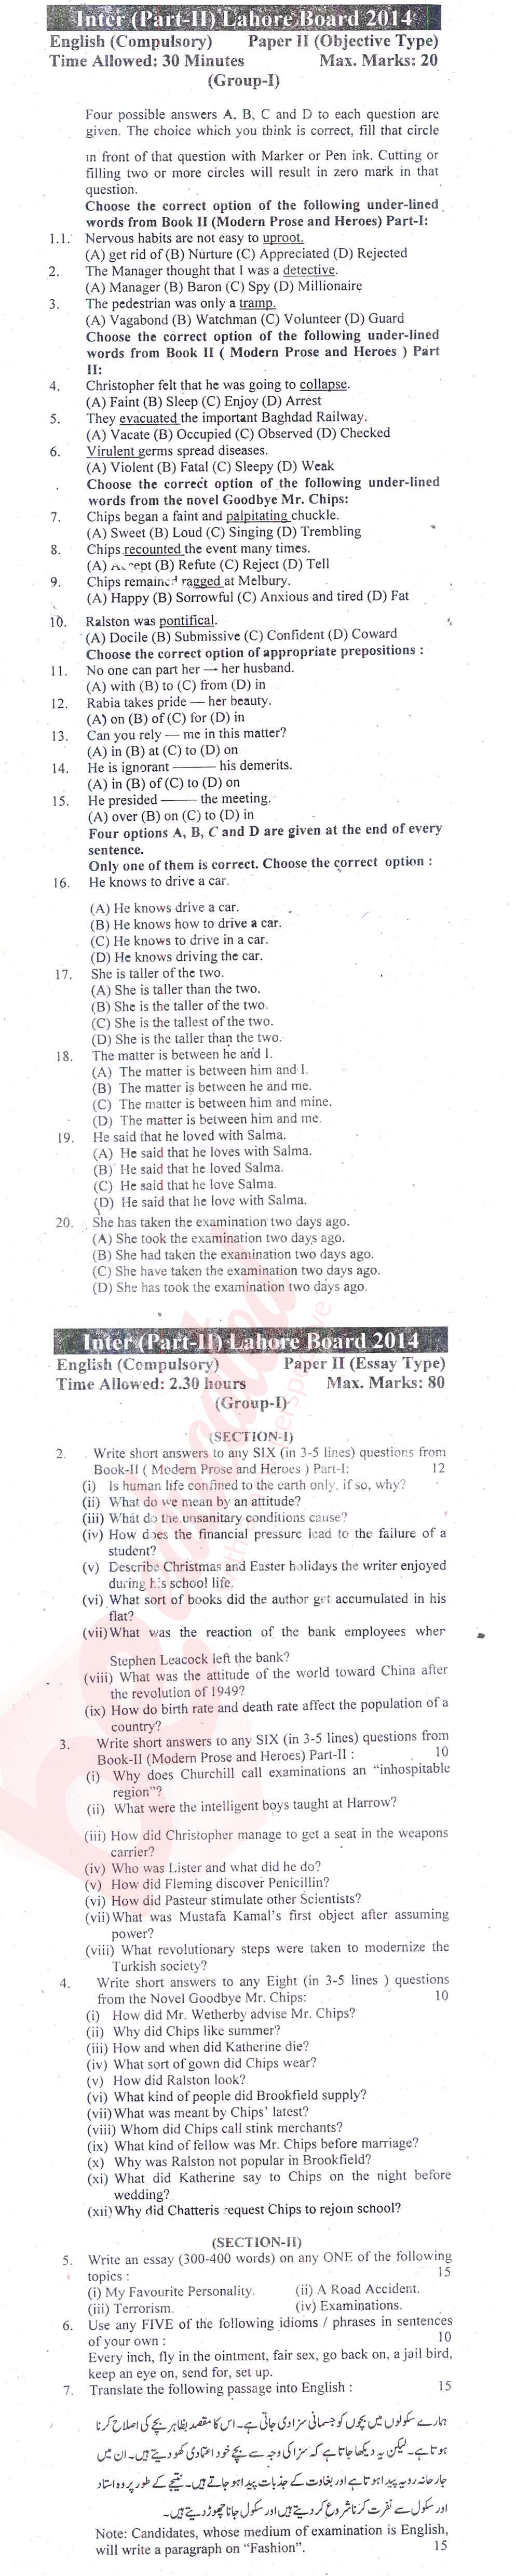 English 12th class Past Paper Group 1 BISE Lahore 2014